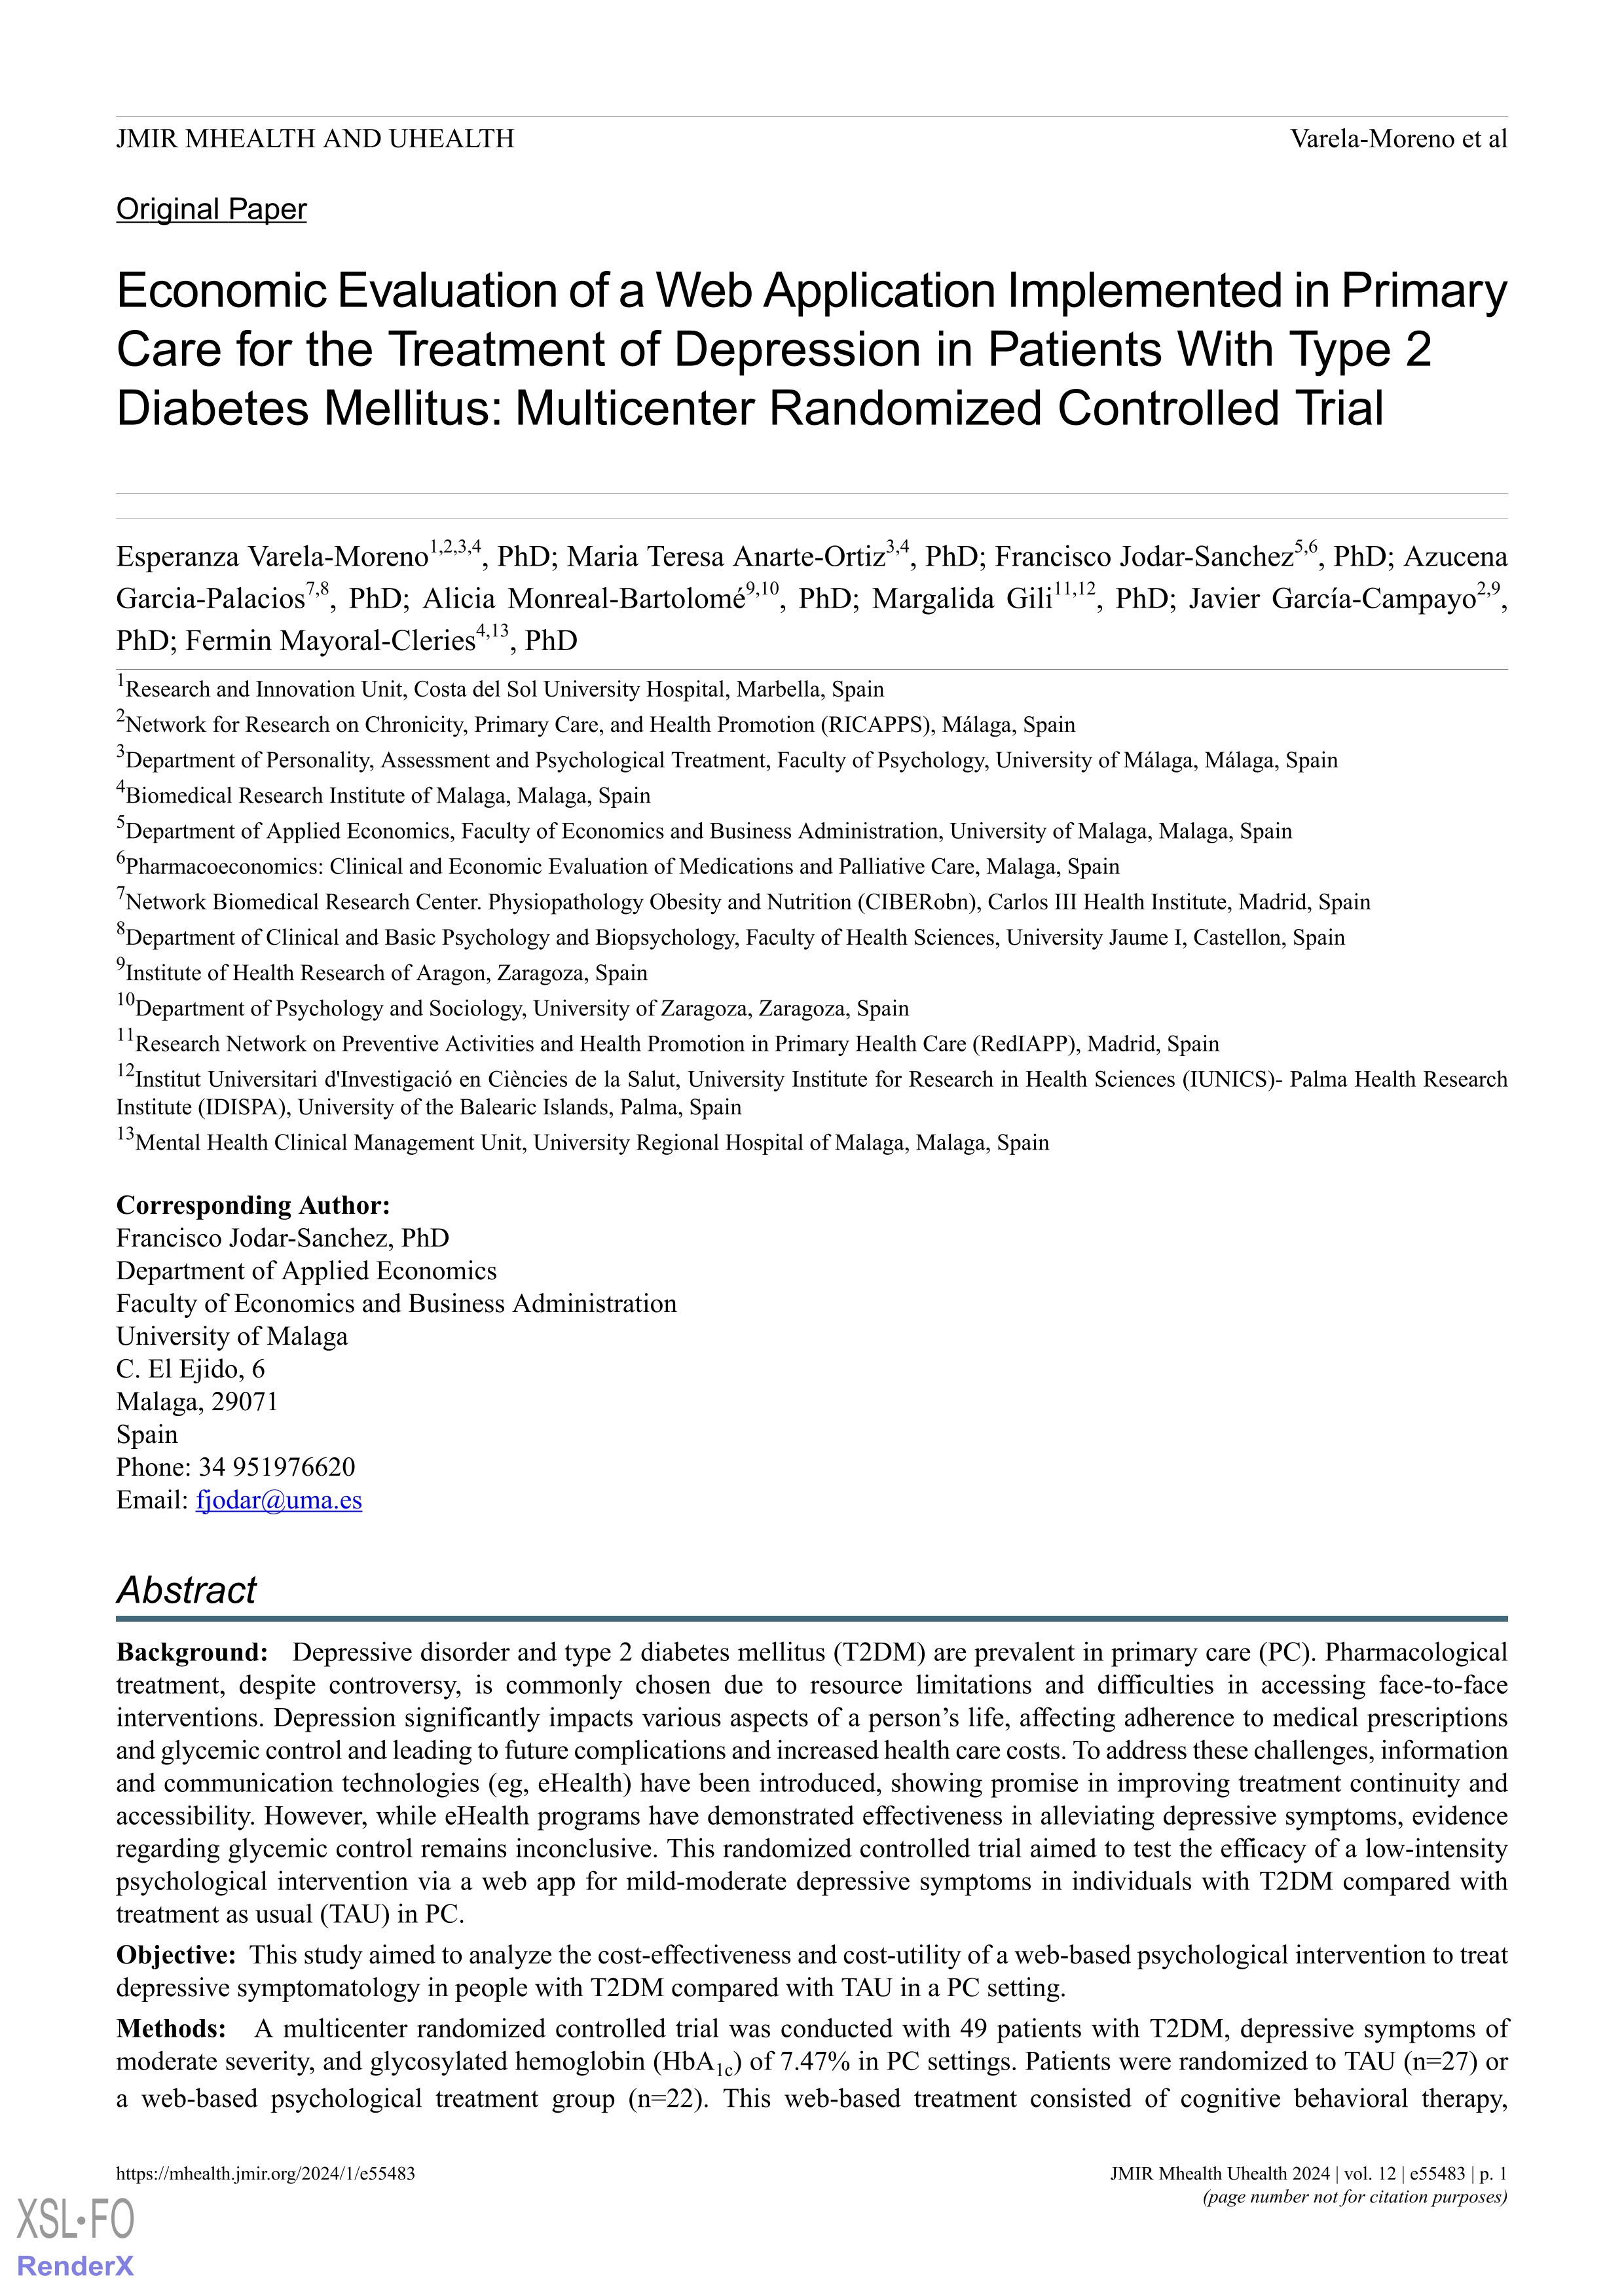 Economic Evaluation of a Web Application Implemented in Primary Care for the Treatment of Depression in Patients With Type 2 Diabetes Mellitus: Multicenter Randomized Controlled Trial